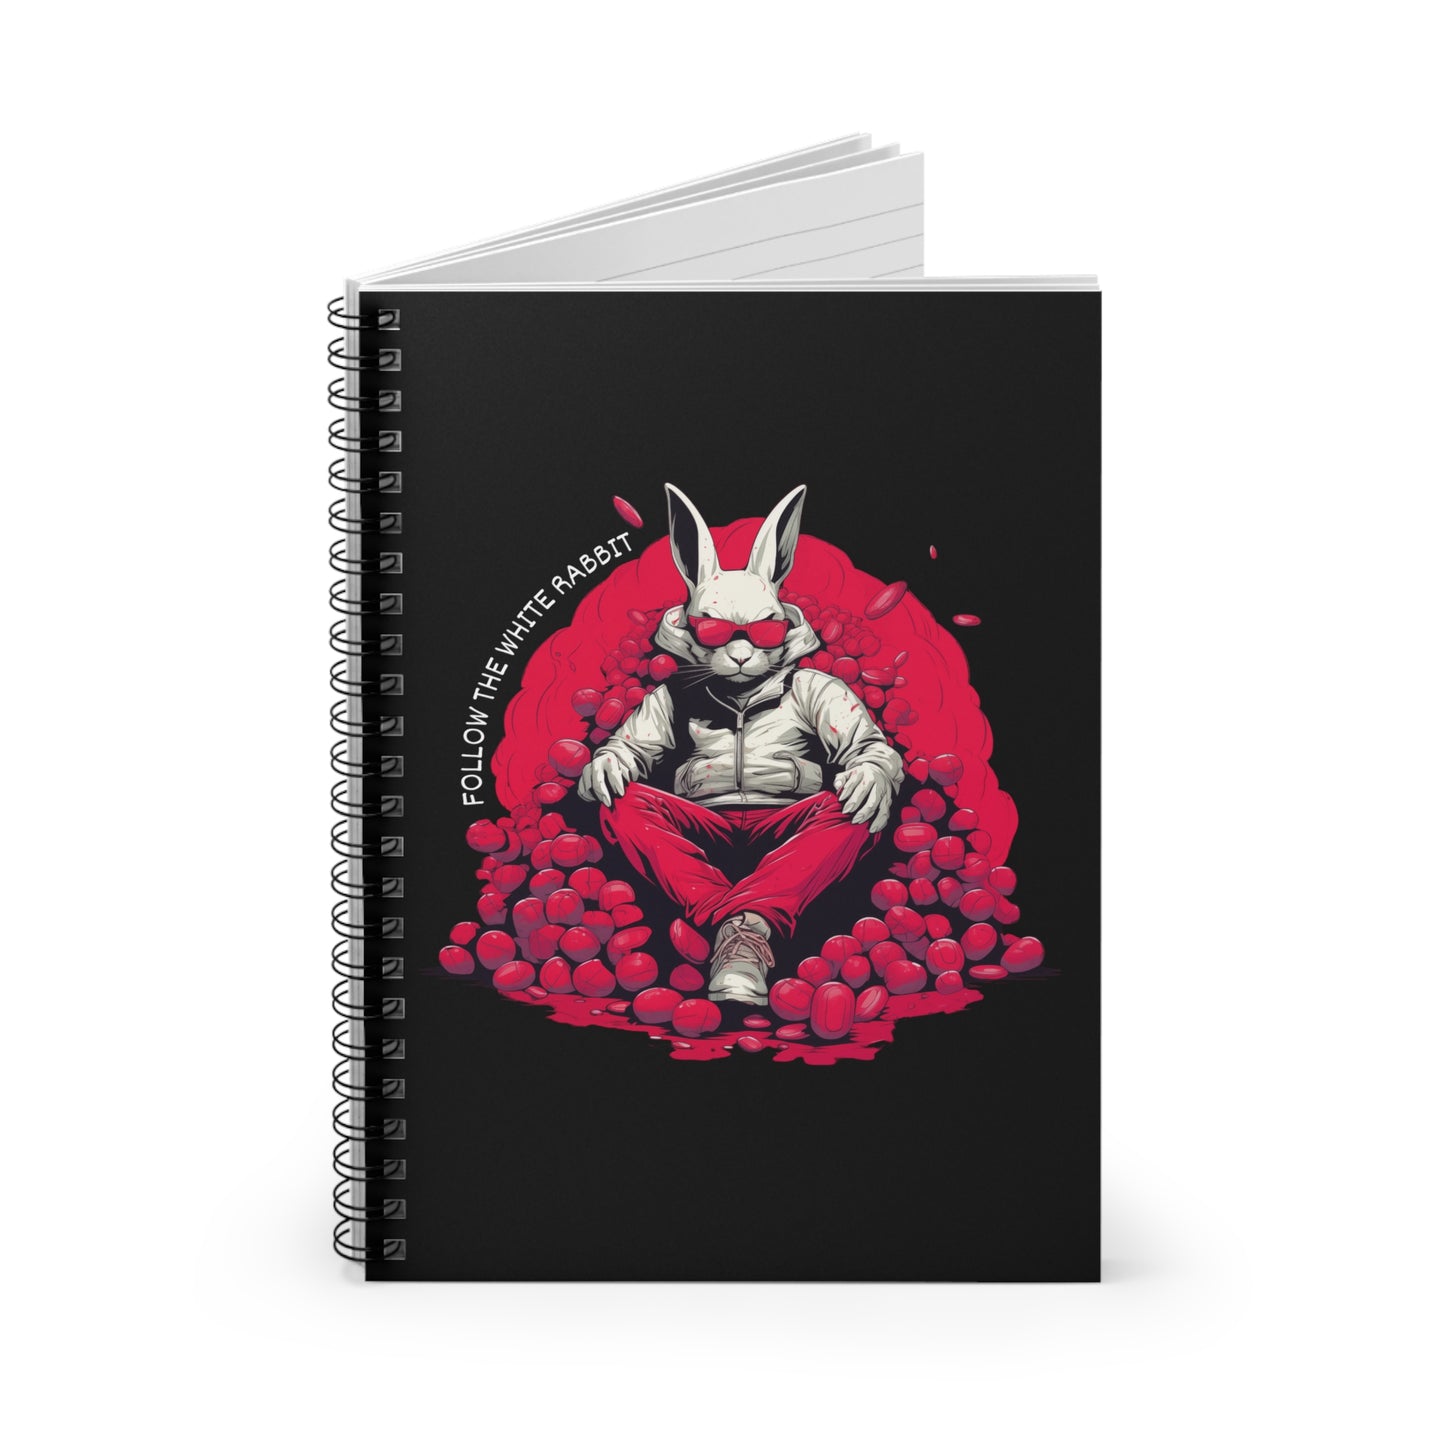 Follow The White Rabbit Signature Spiral Notebook - Ruled Line